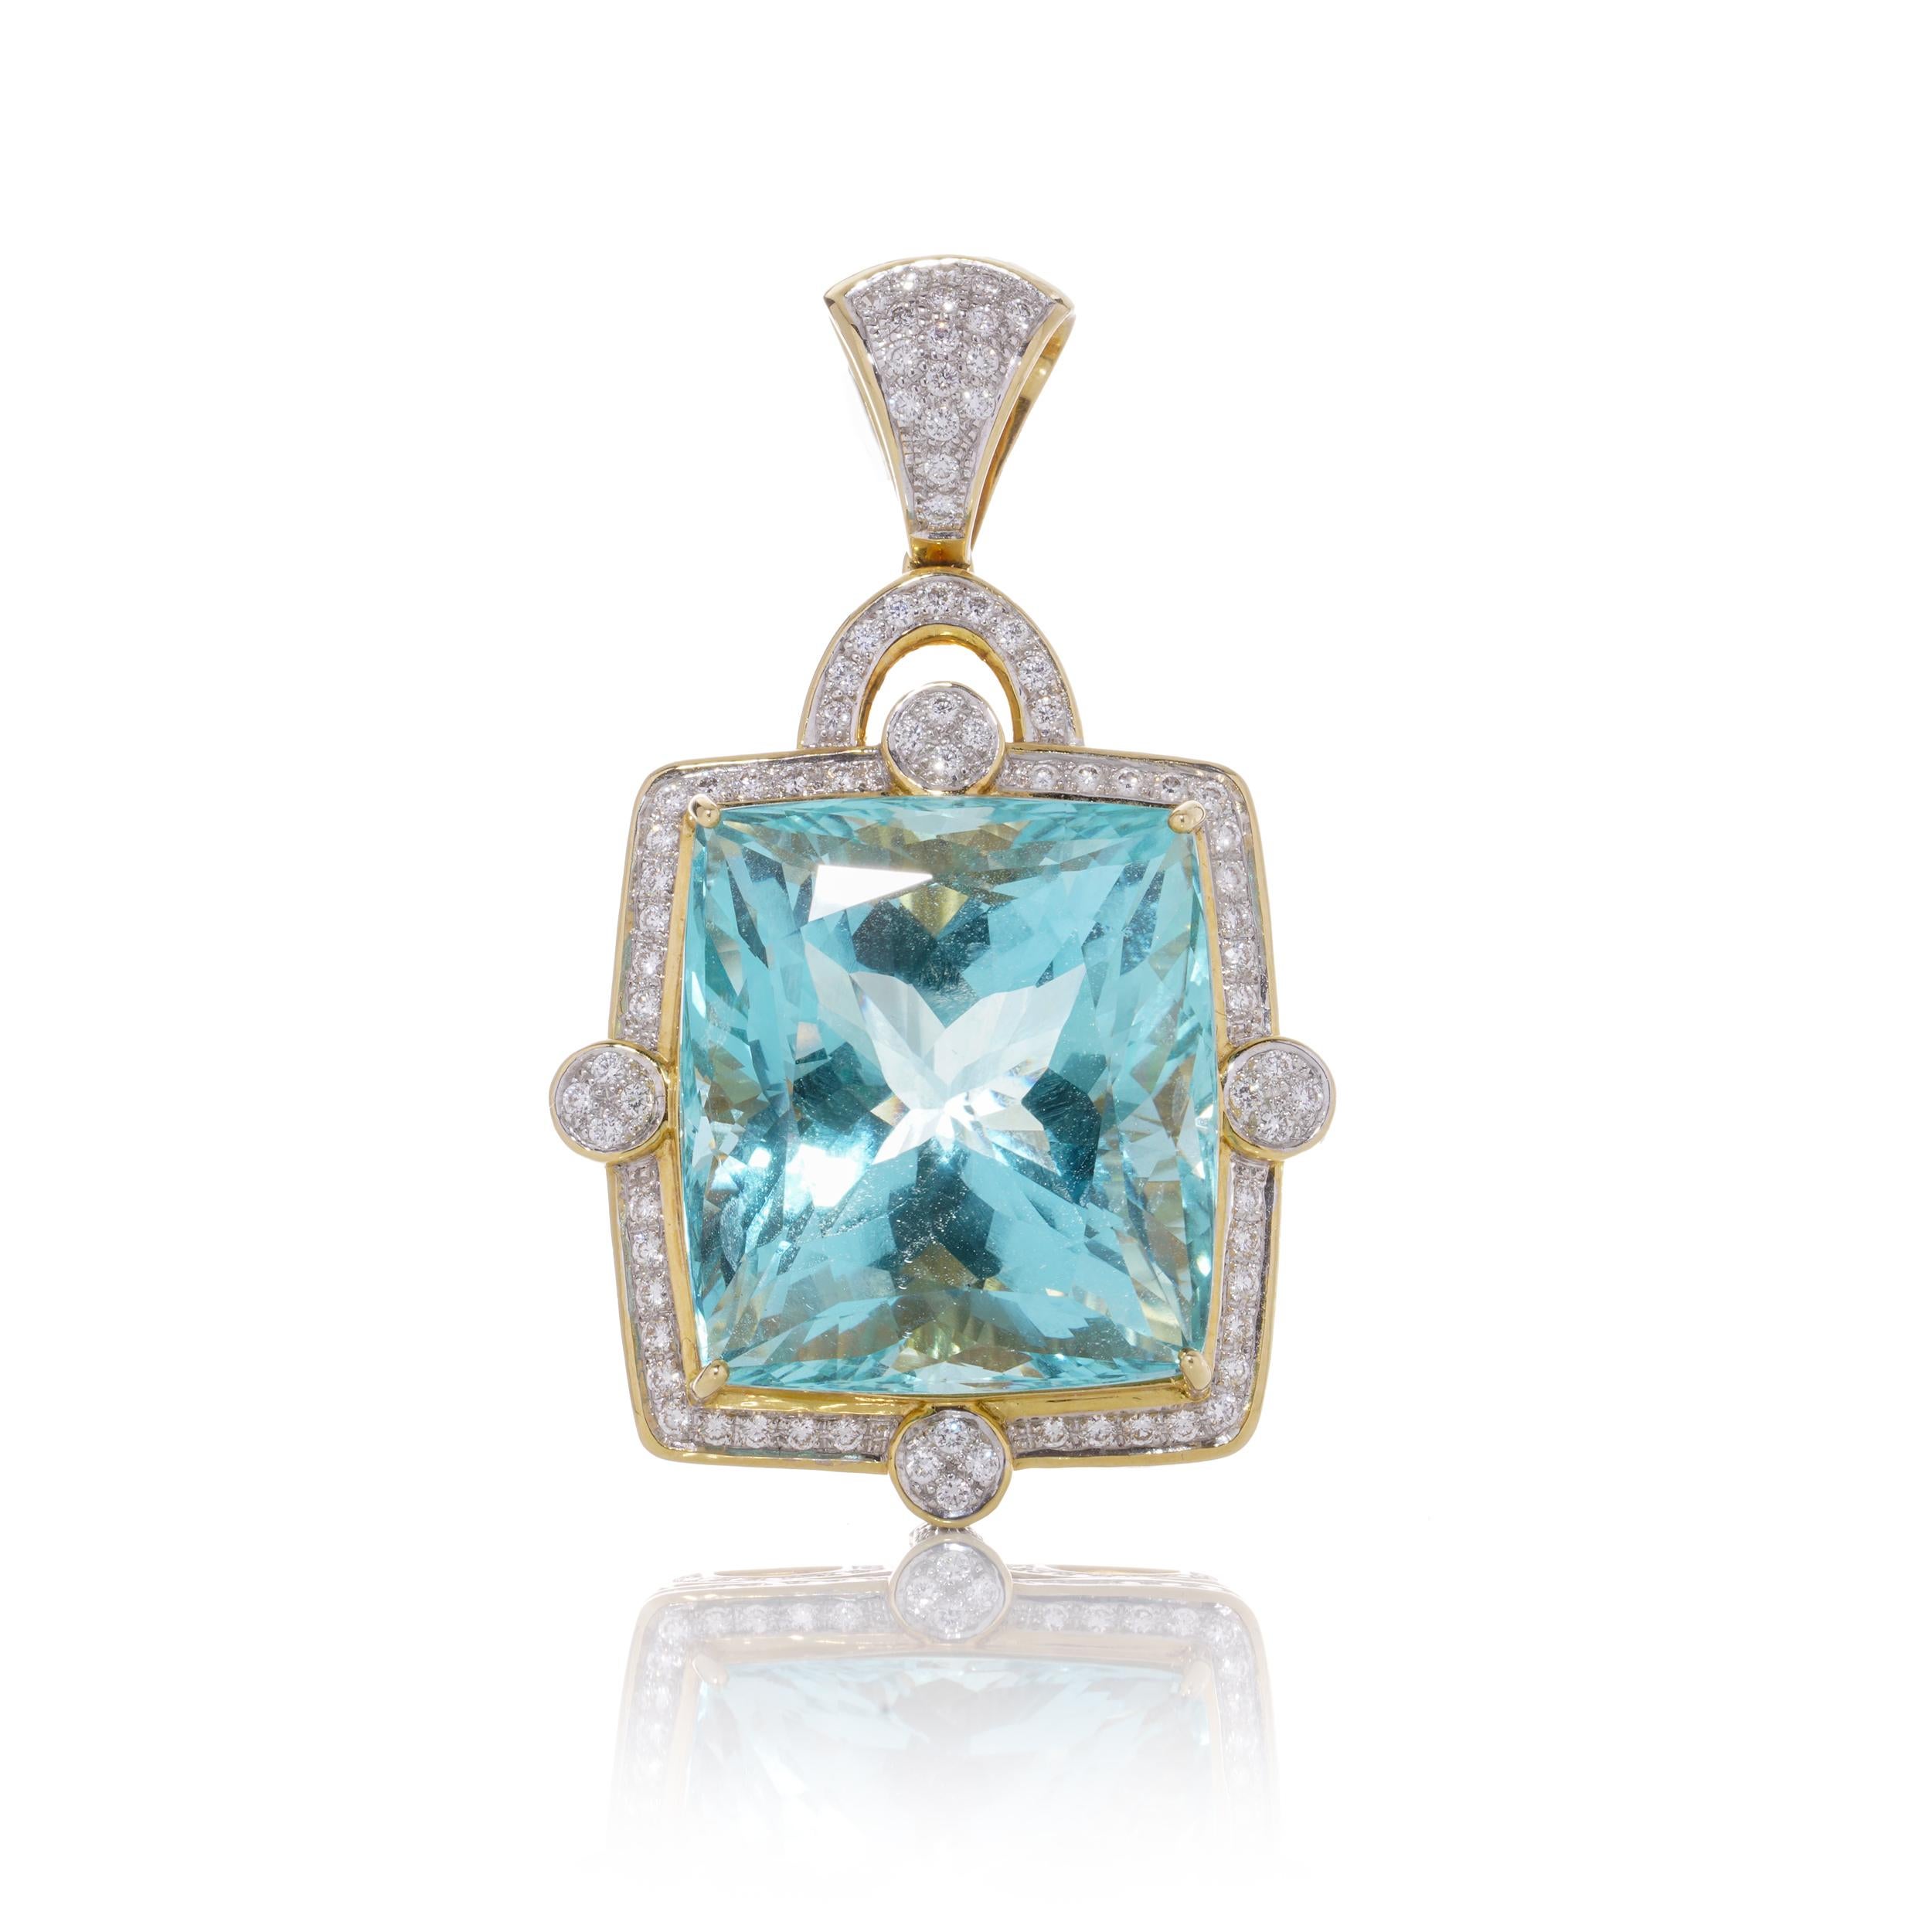 Exclusive 18k. yellow and white gold approx. 120 carats of Aquamarine pendant, surrounded by round brilliant cut diamonds.

Dimensions:
Length: 5.5 cm ( with bail )
Width: 3.3 cm
Depth: 2 cm

Pendant Weight: 39.7 grams

Aquamarine -
Cut: Rectangular